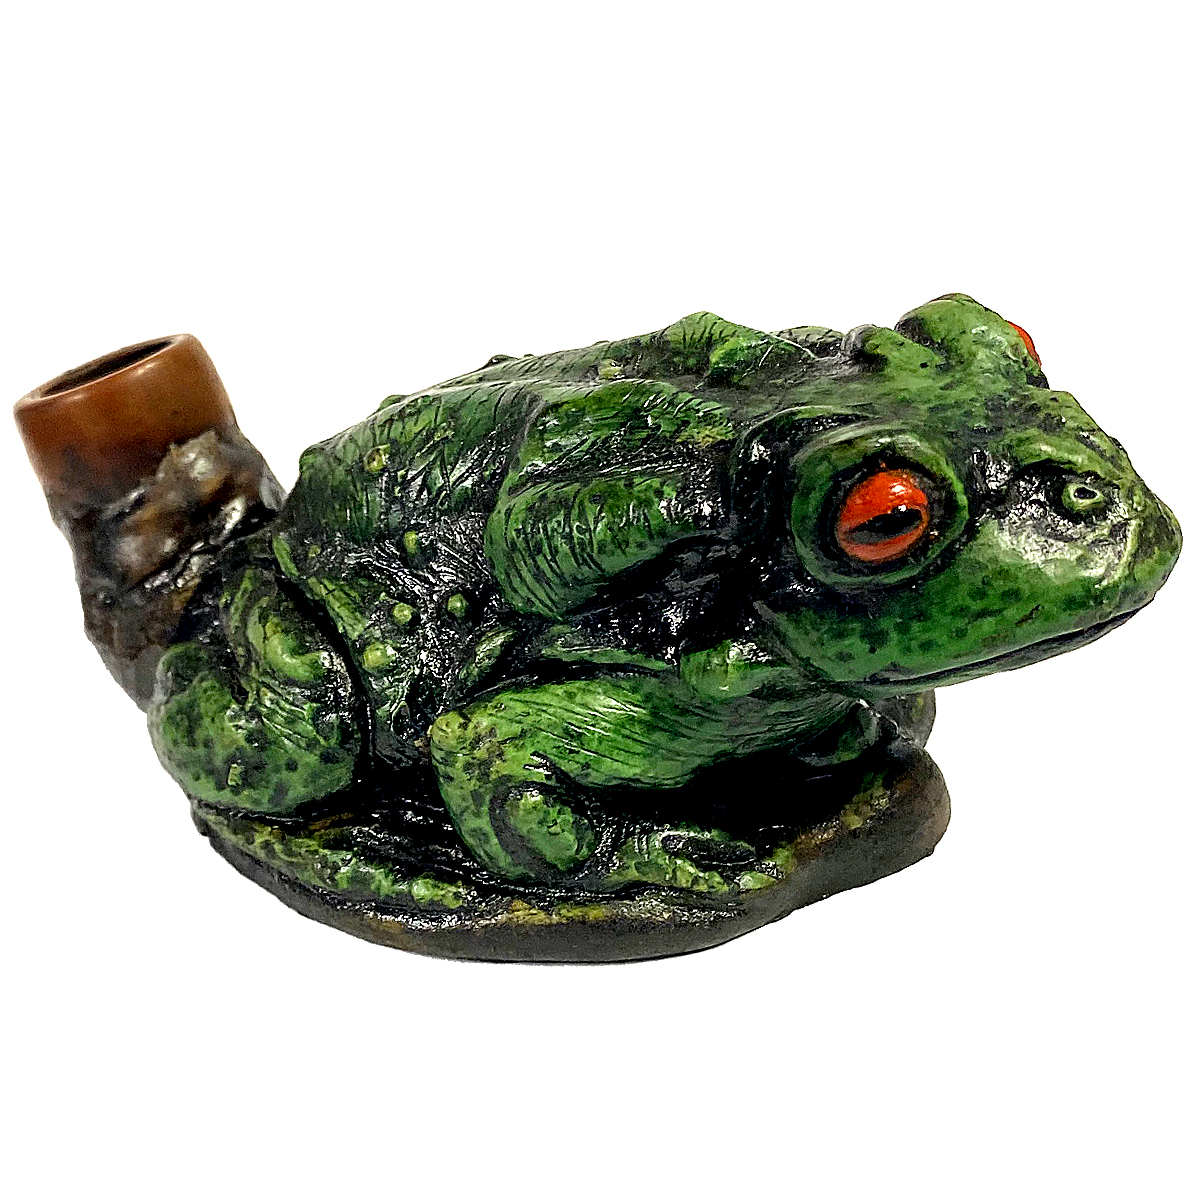 Handcrafted medium-sized tobacco smoking hand pipe of a toad bullfrog. Smoke from the mouthpiece on its mouth.